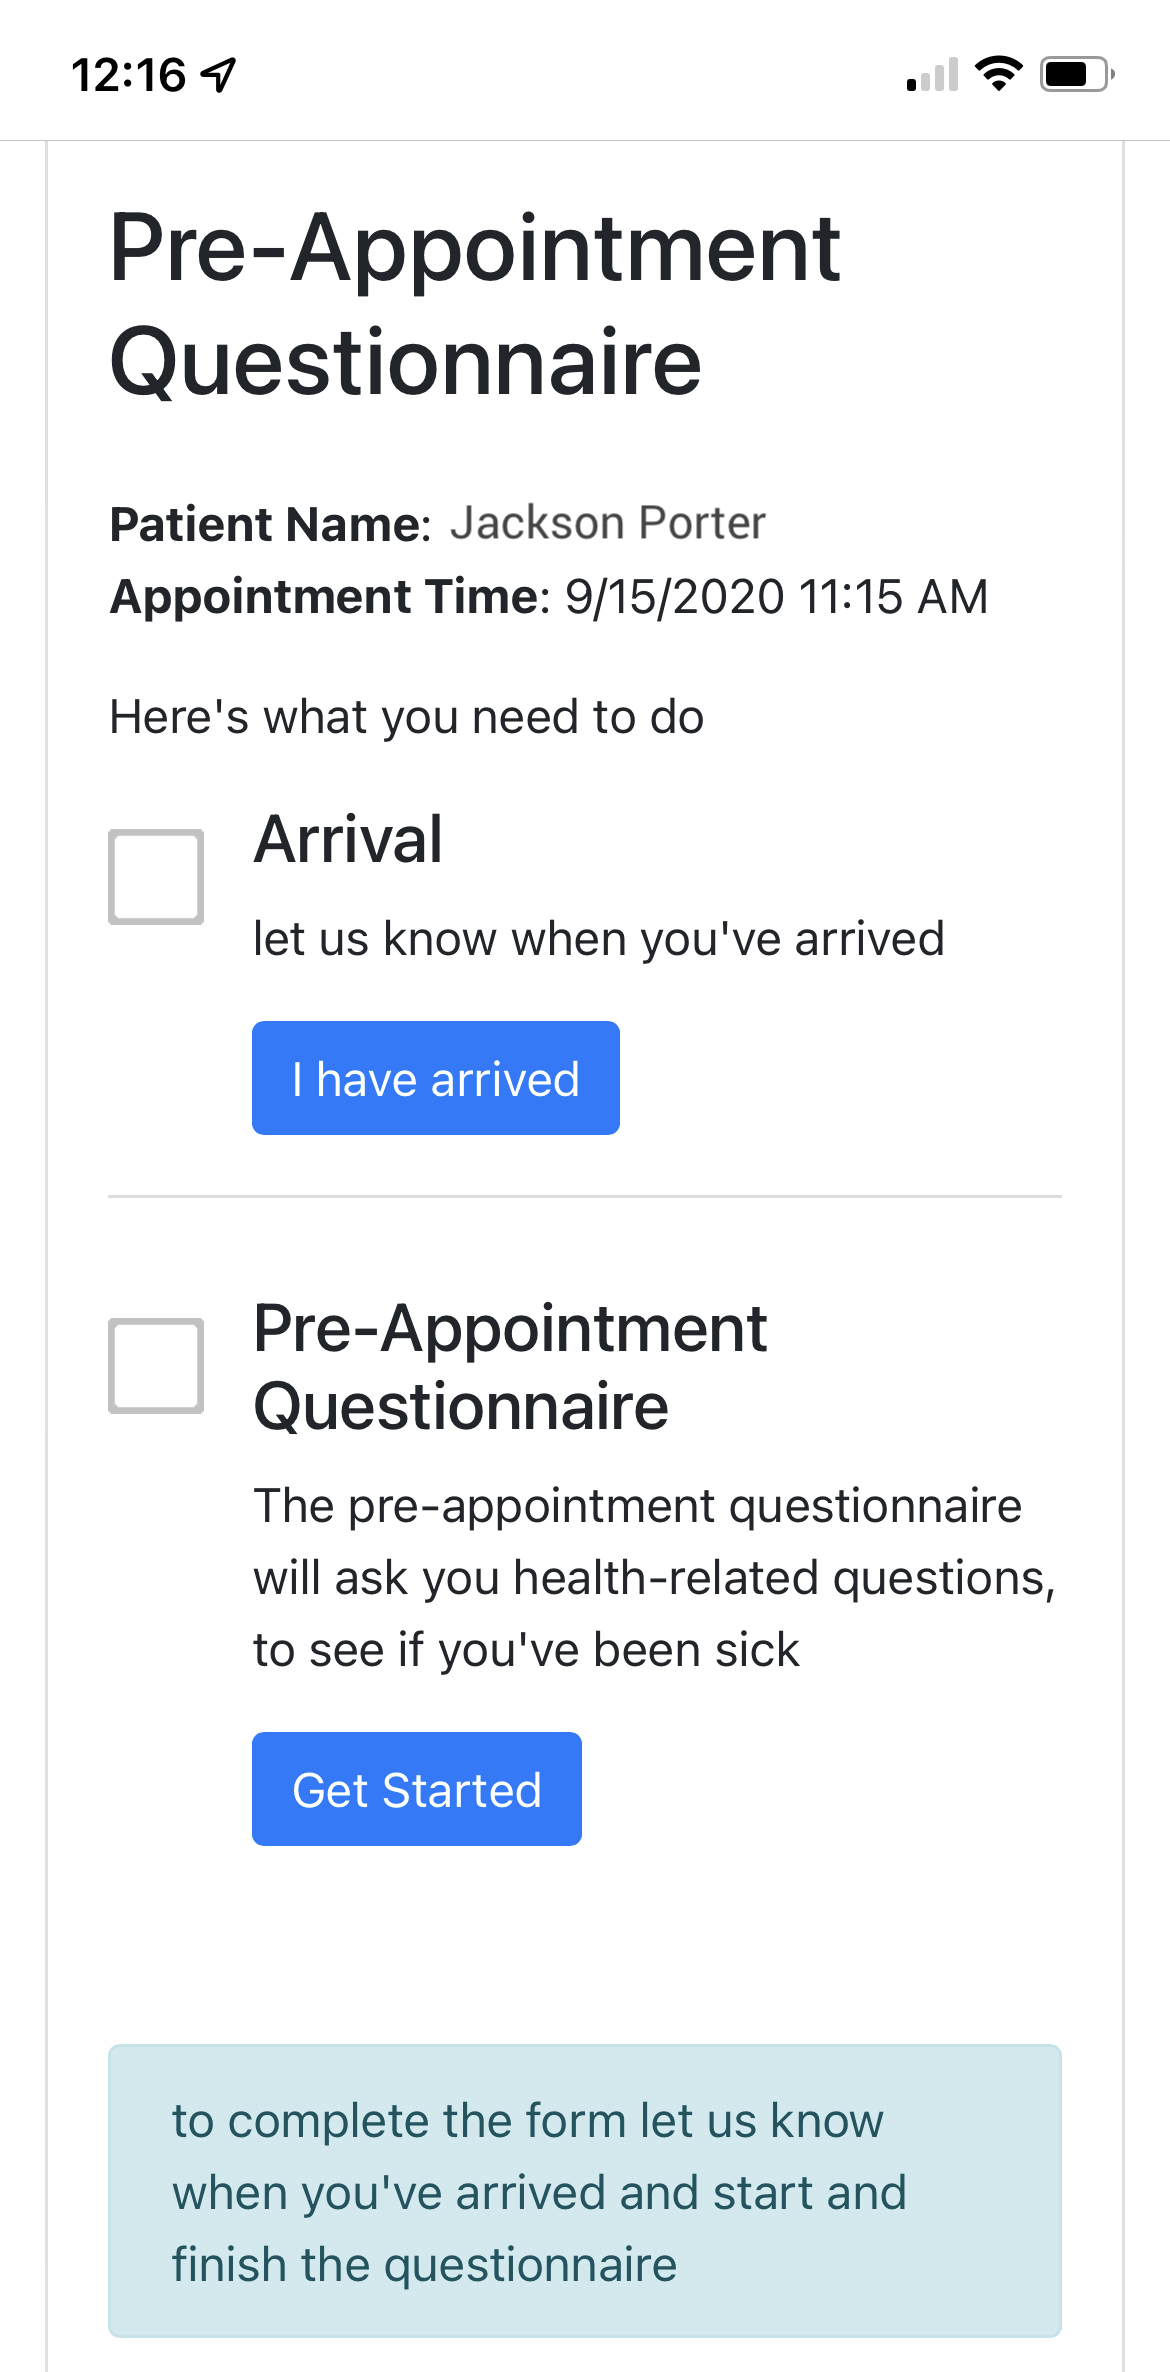 A mobile screenshot of the pre-appointment questionnaire status page, showing an 'Arrival' and 'Pre-Appointment Questionnaire' status for the user to fill out